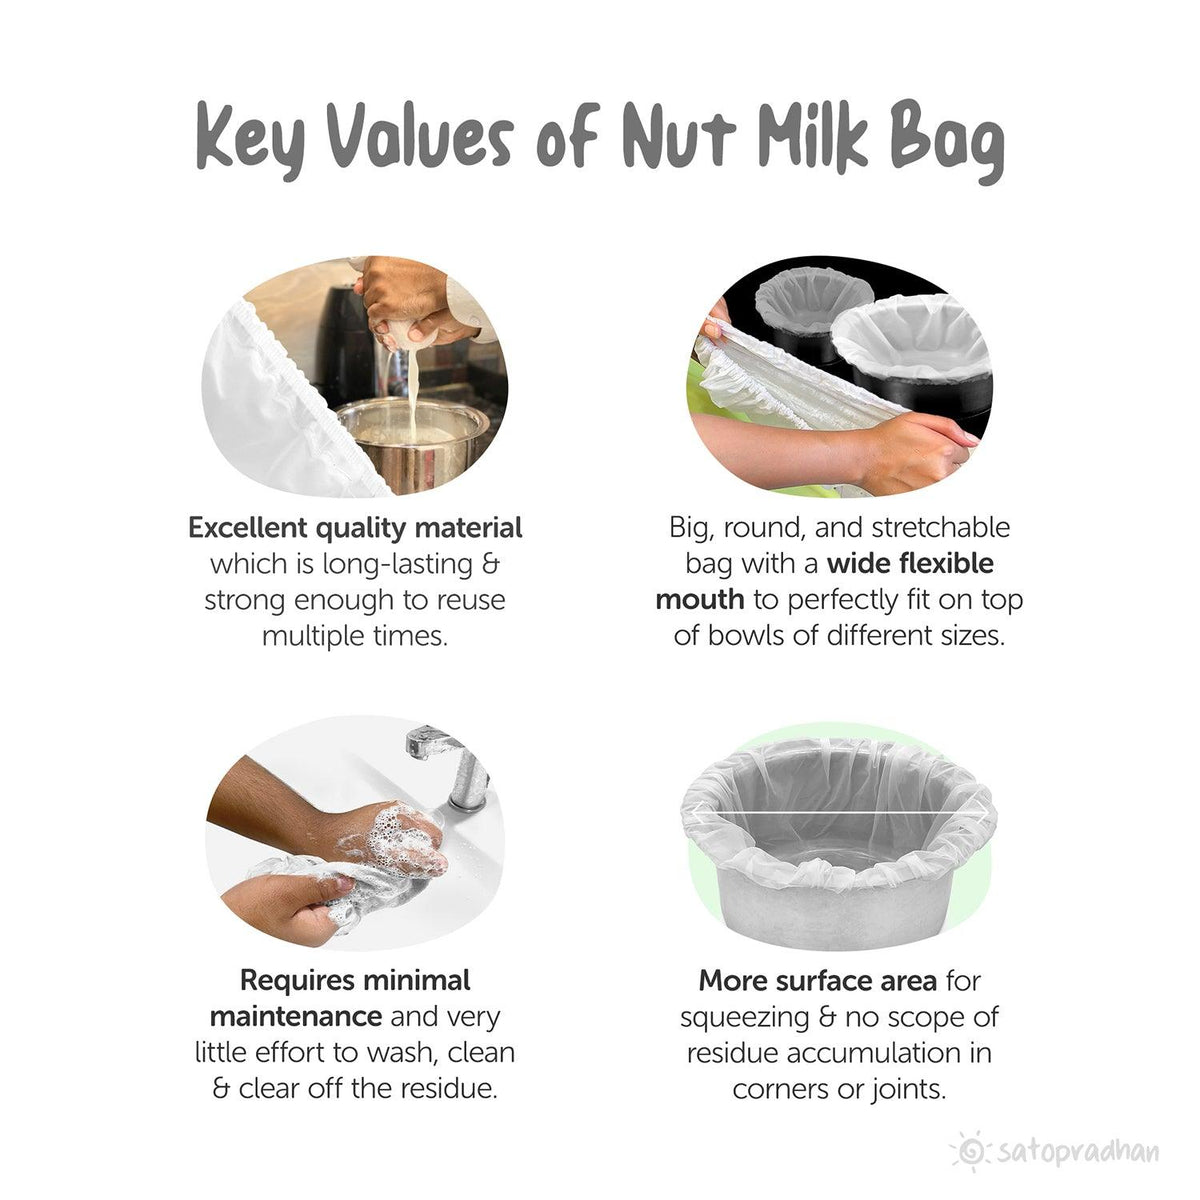 Nut Milk Bag - A perfect Food-Grade Strainer to sieve your Dairy-free Milk & Juices finely - Durable & Easy to Use - Satopradhan